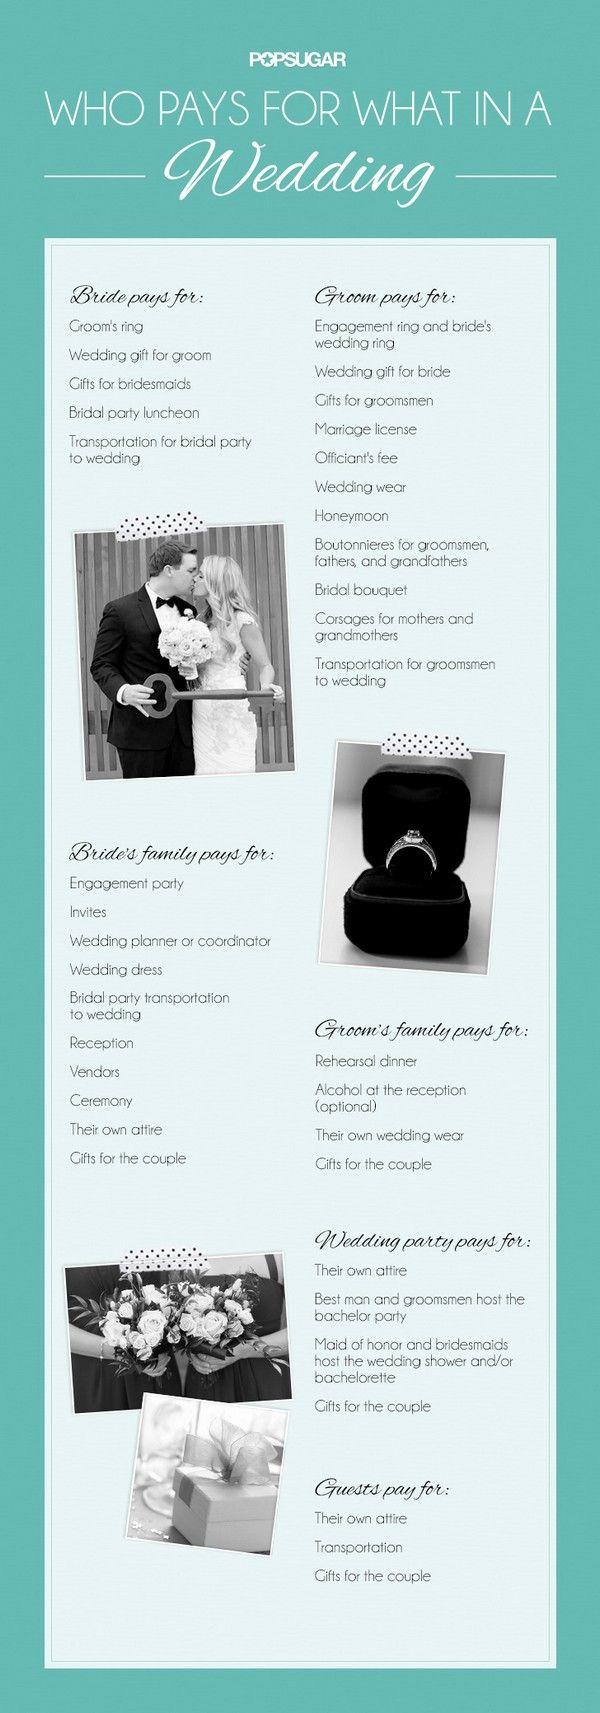 Wedding - 10 Useful Wedding Planning Infographics To Give Some Ideas And Tips